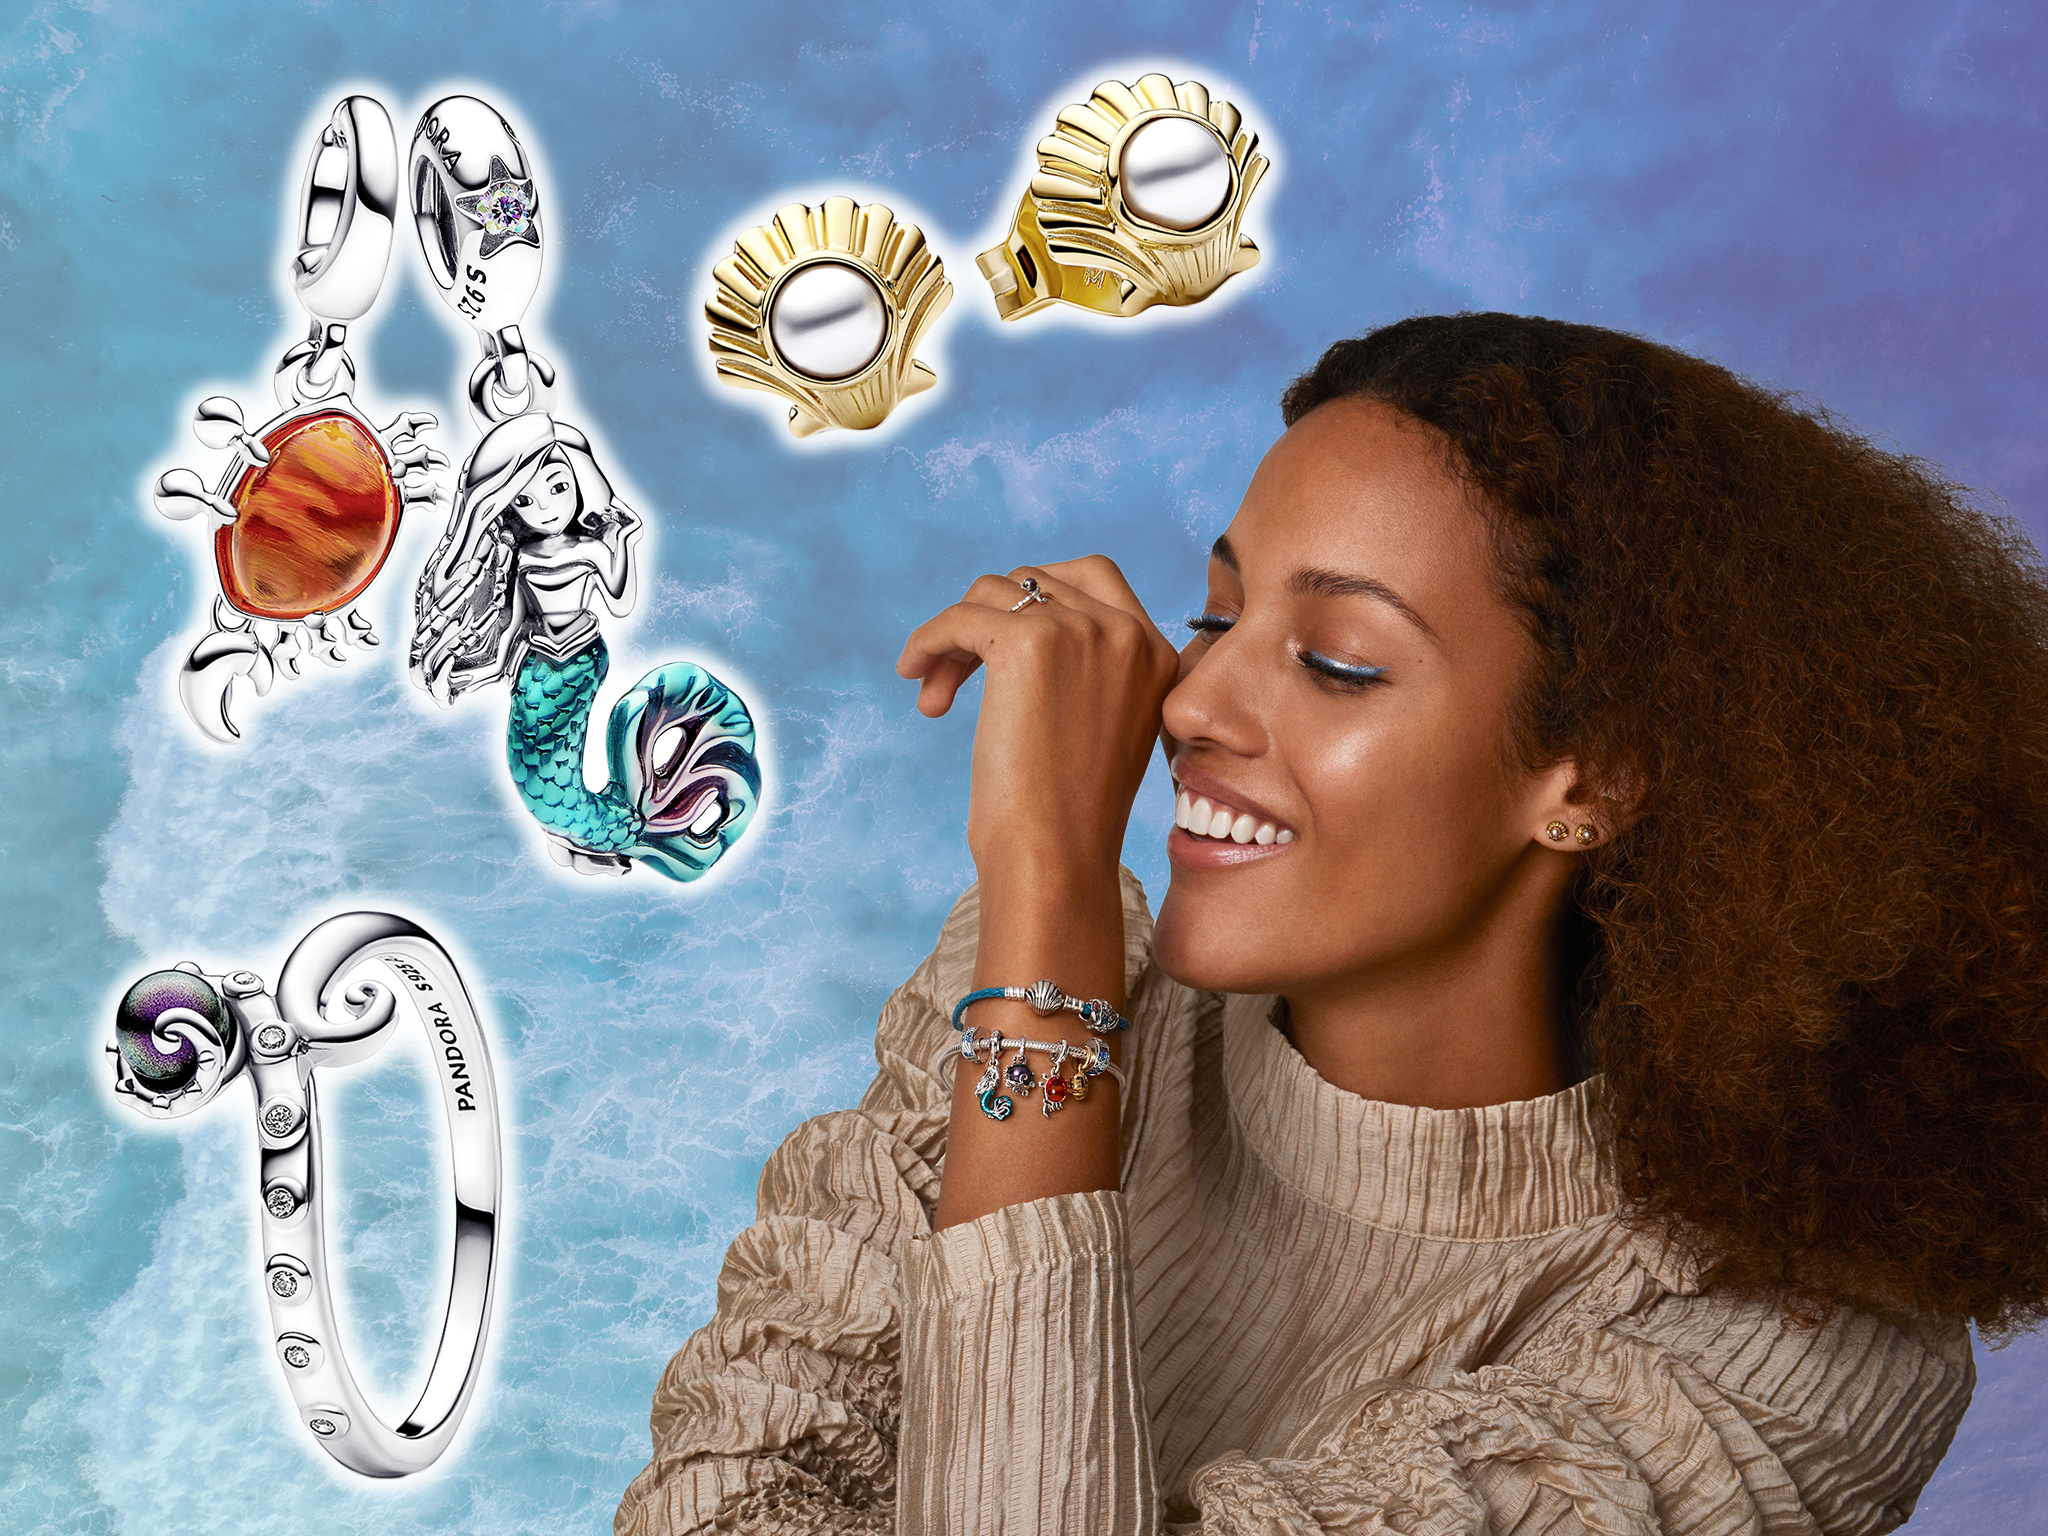 Ursula, Ariel and Sebastian all feature on rings, earrings and charms